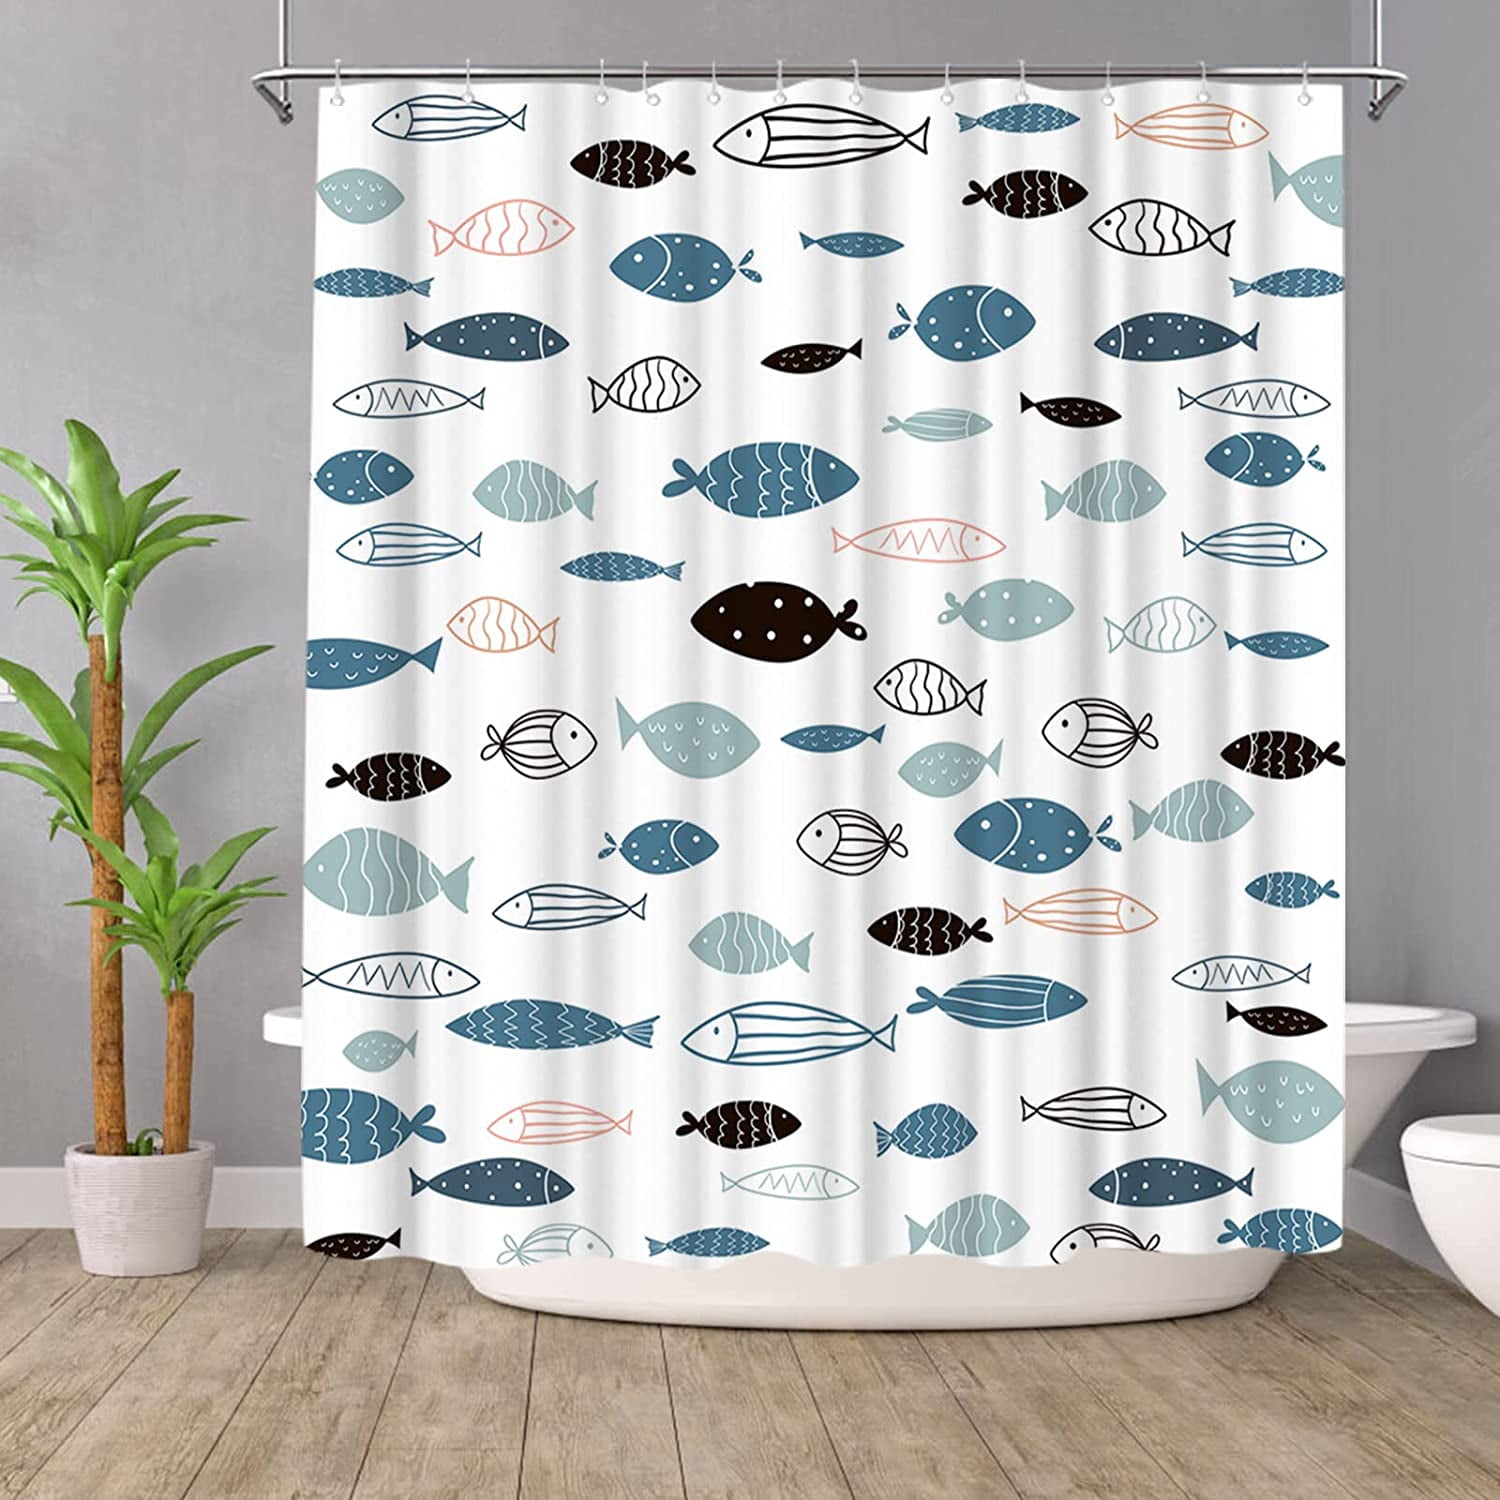 Koi Carp Fish Shower Curtains Waterproof Durable Fabric Bathroom Shower  Curtain Set Standard Size with Hooks 72X72inch